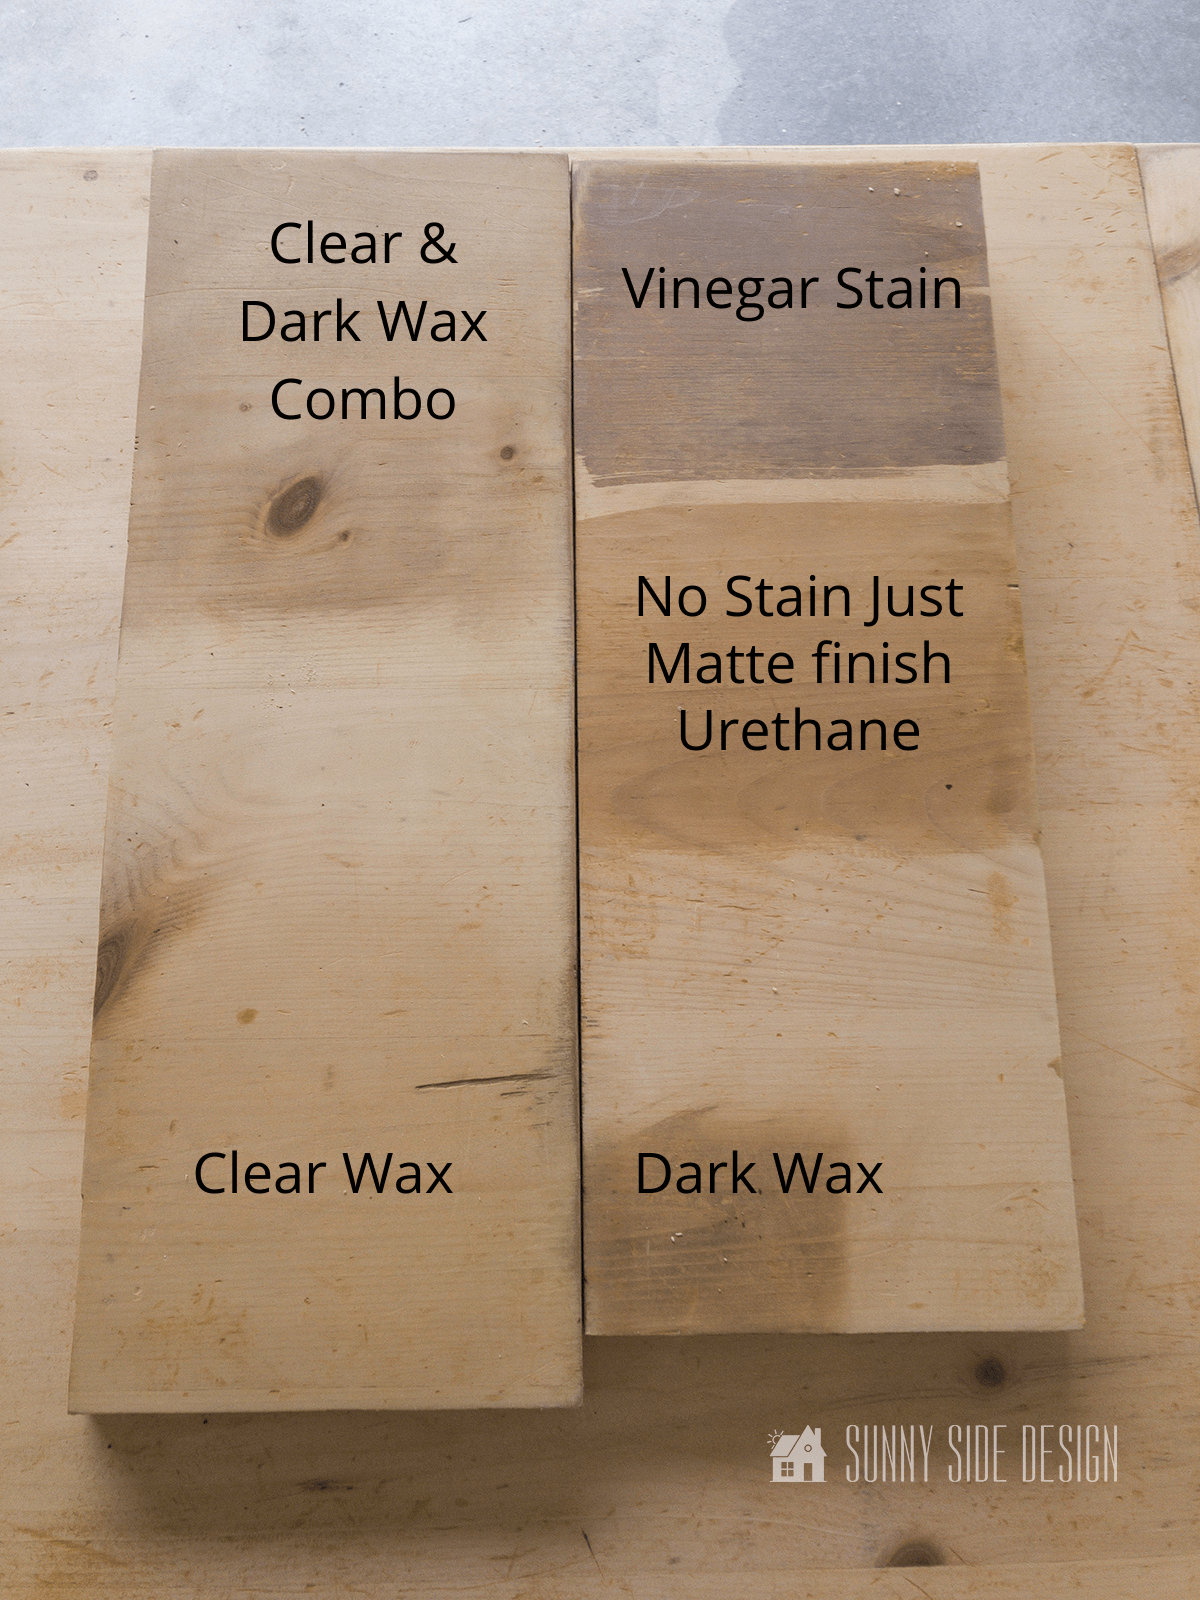 Samples of stain and clear finish on scraps of wood.